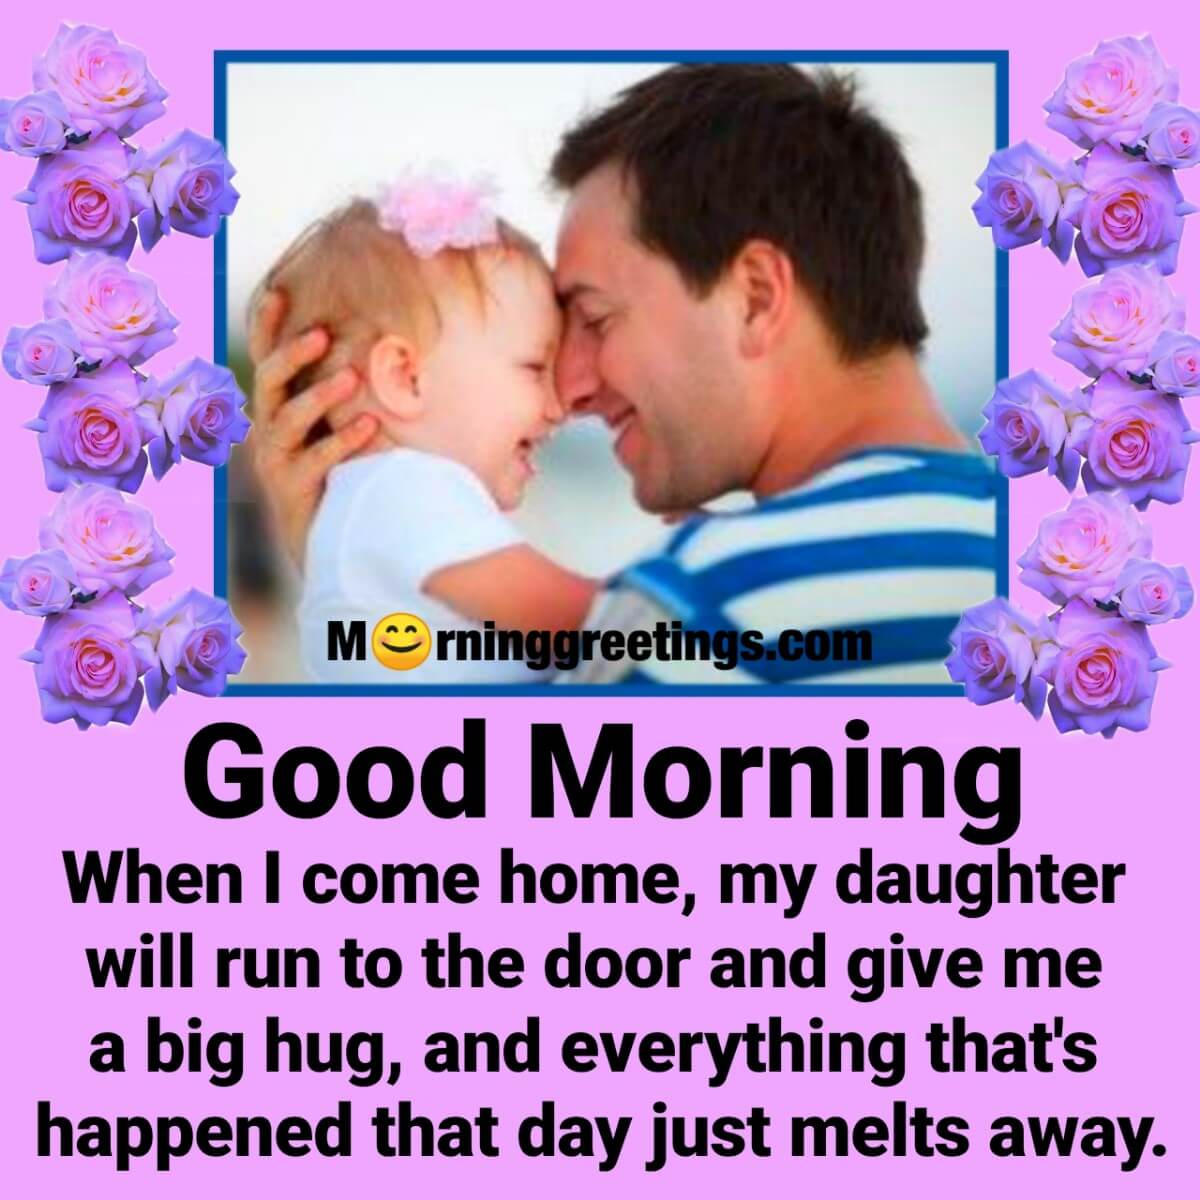 Good Morning Hug Quote Of Daughter And Father